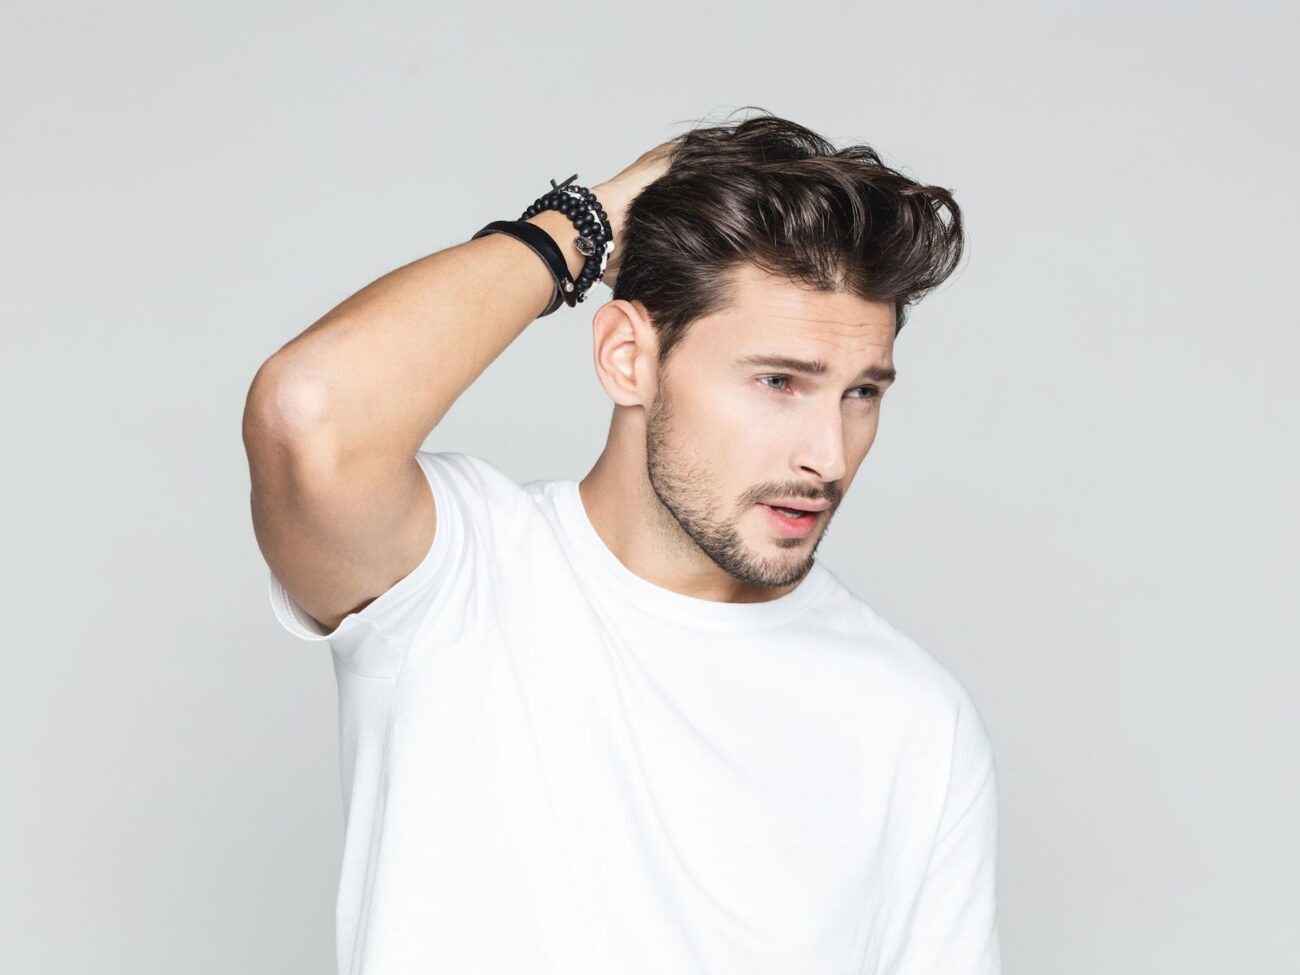 Looking for a solution to hair loss? Toupee hair replacement systems are increasingly becoming the ideal option for men wanting a full head of hair!